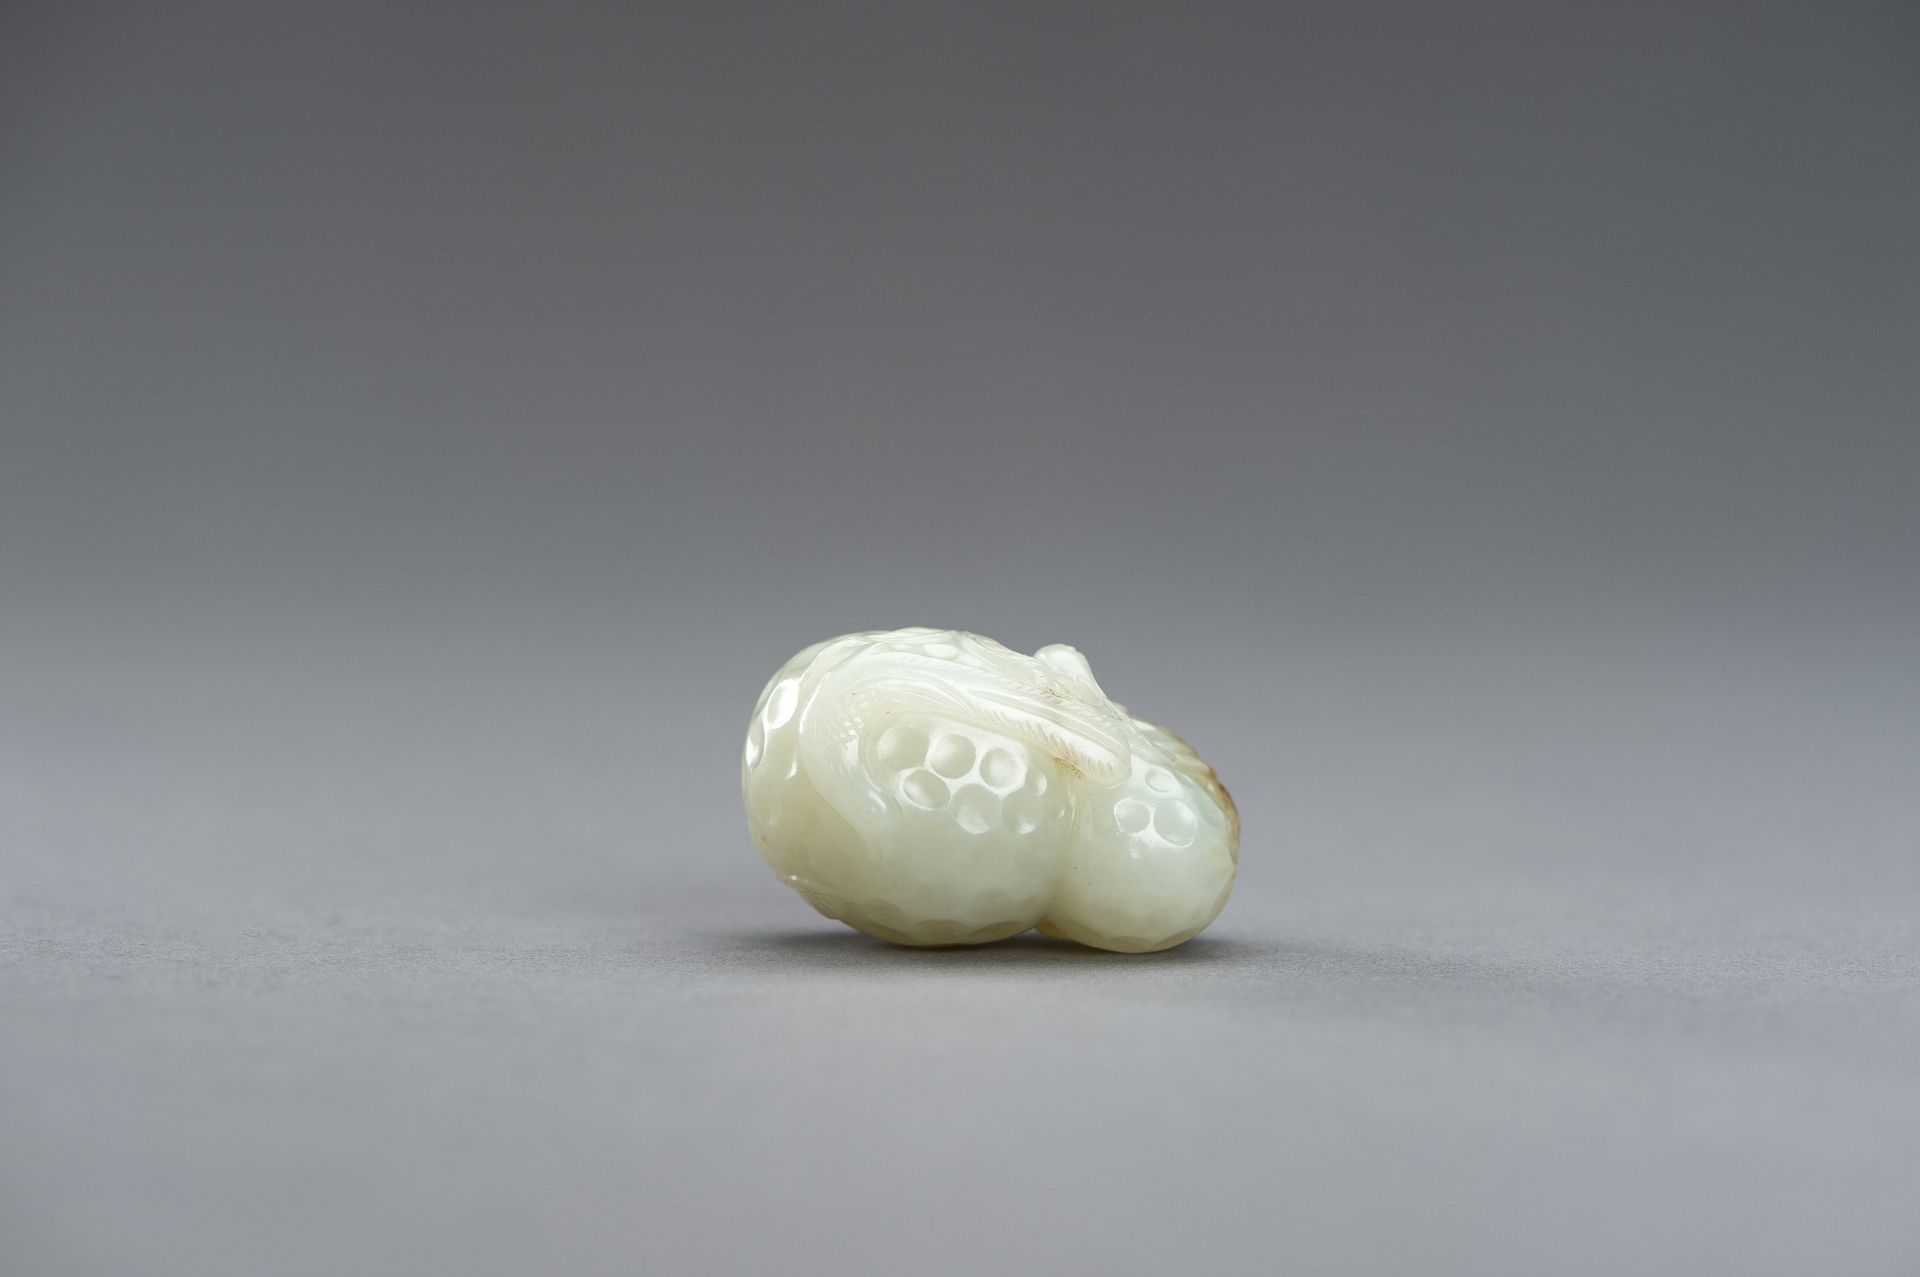 A CELADON JADE PENDANT OF A LYCHEE WITH BIRDS, 1920s - Image 6 of 9